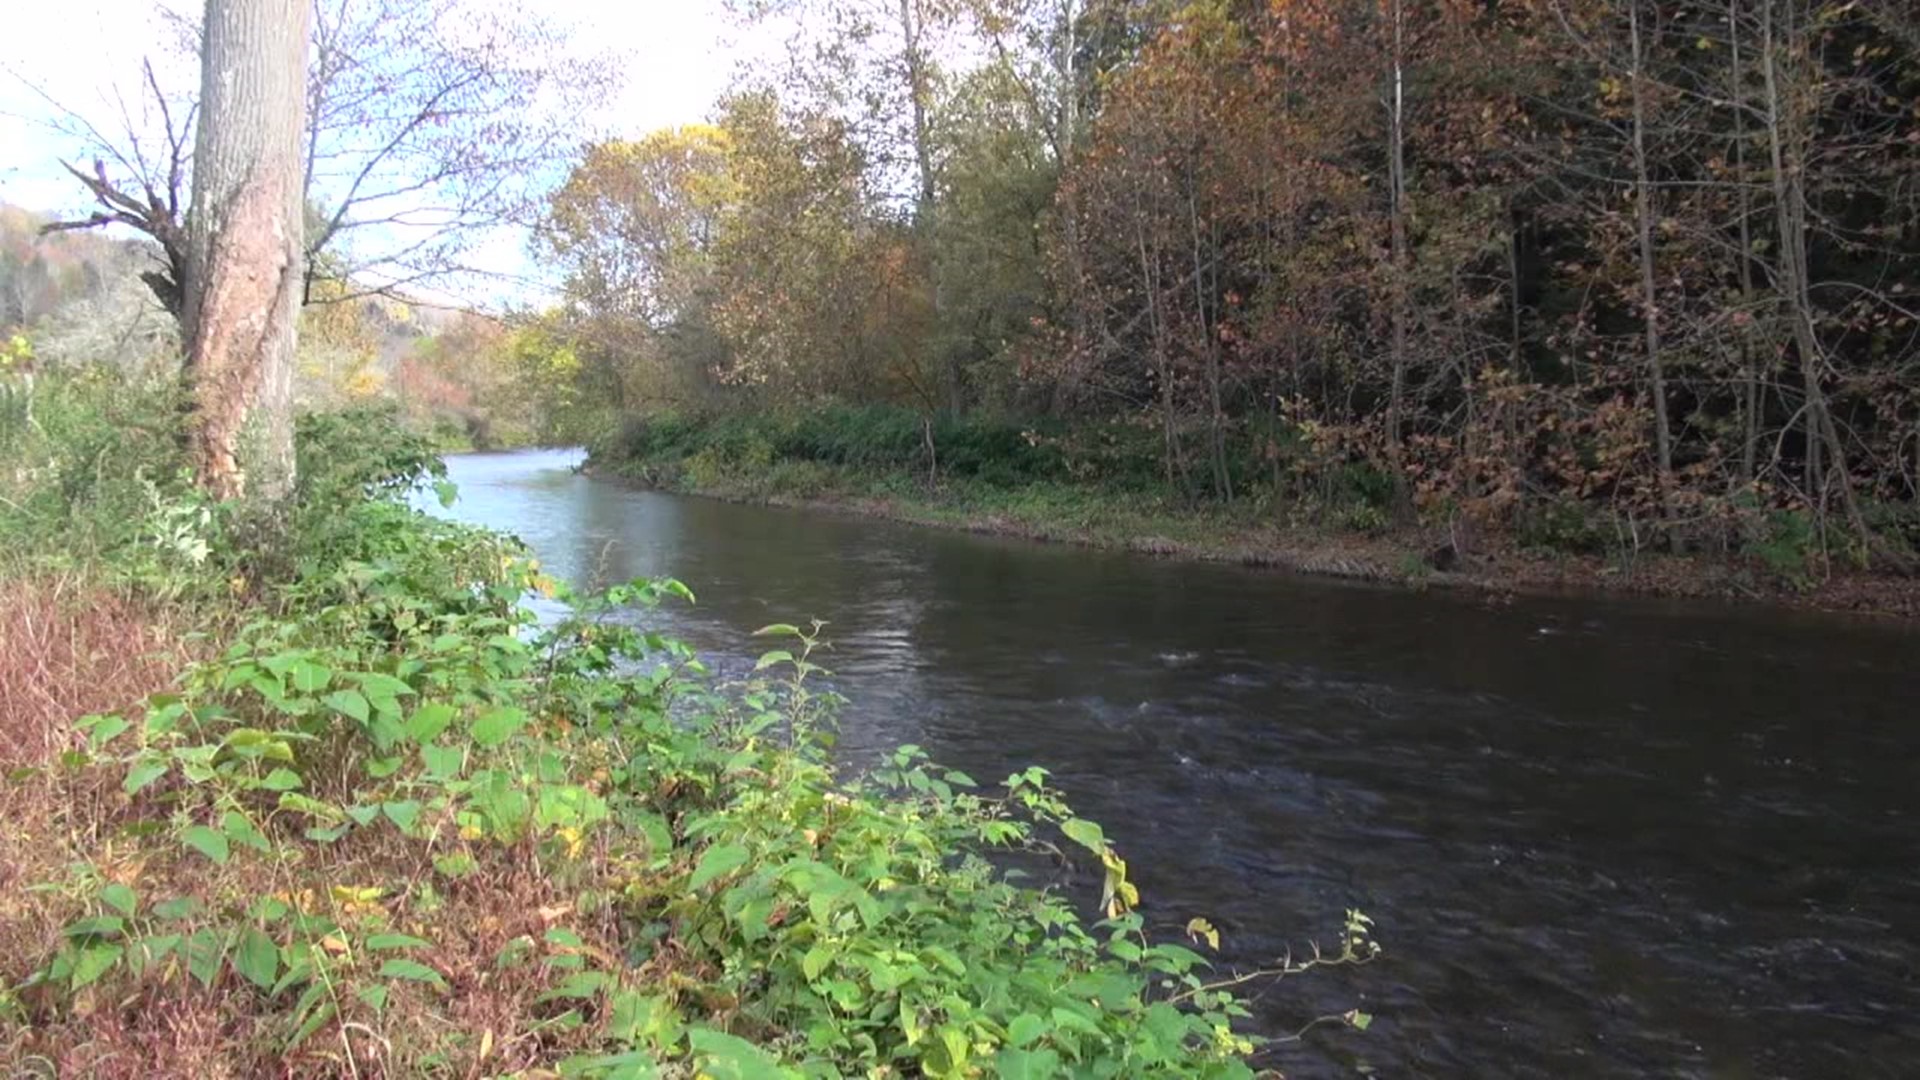 This month, watershed specialists in Susquehanna County are trying to raise awareness about the importance of clean water and protecting our creeks and streams.